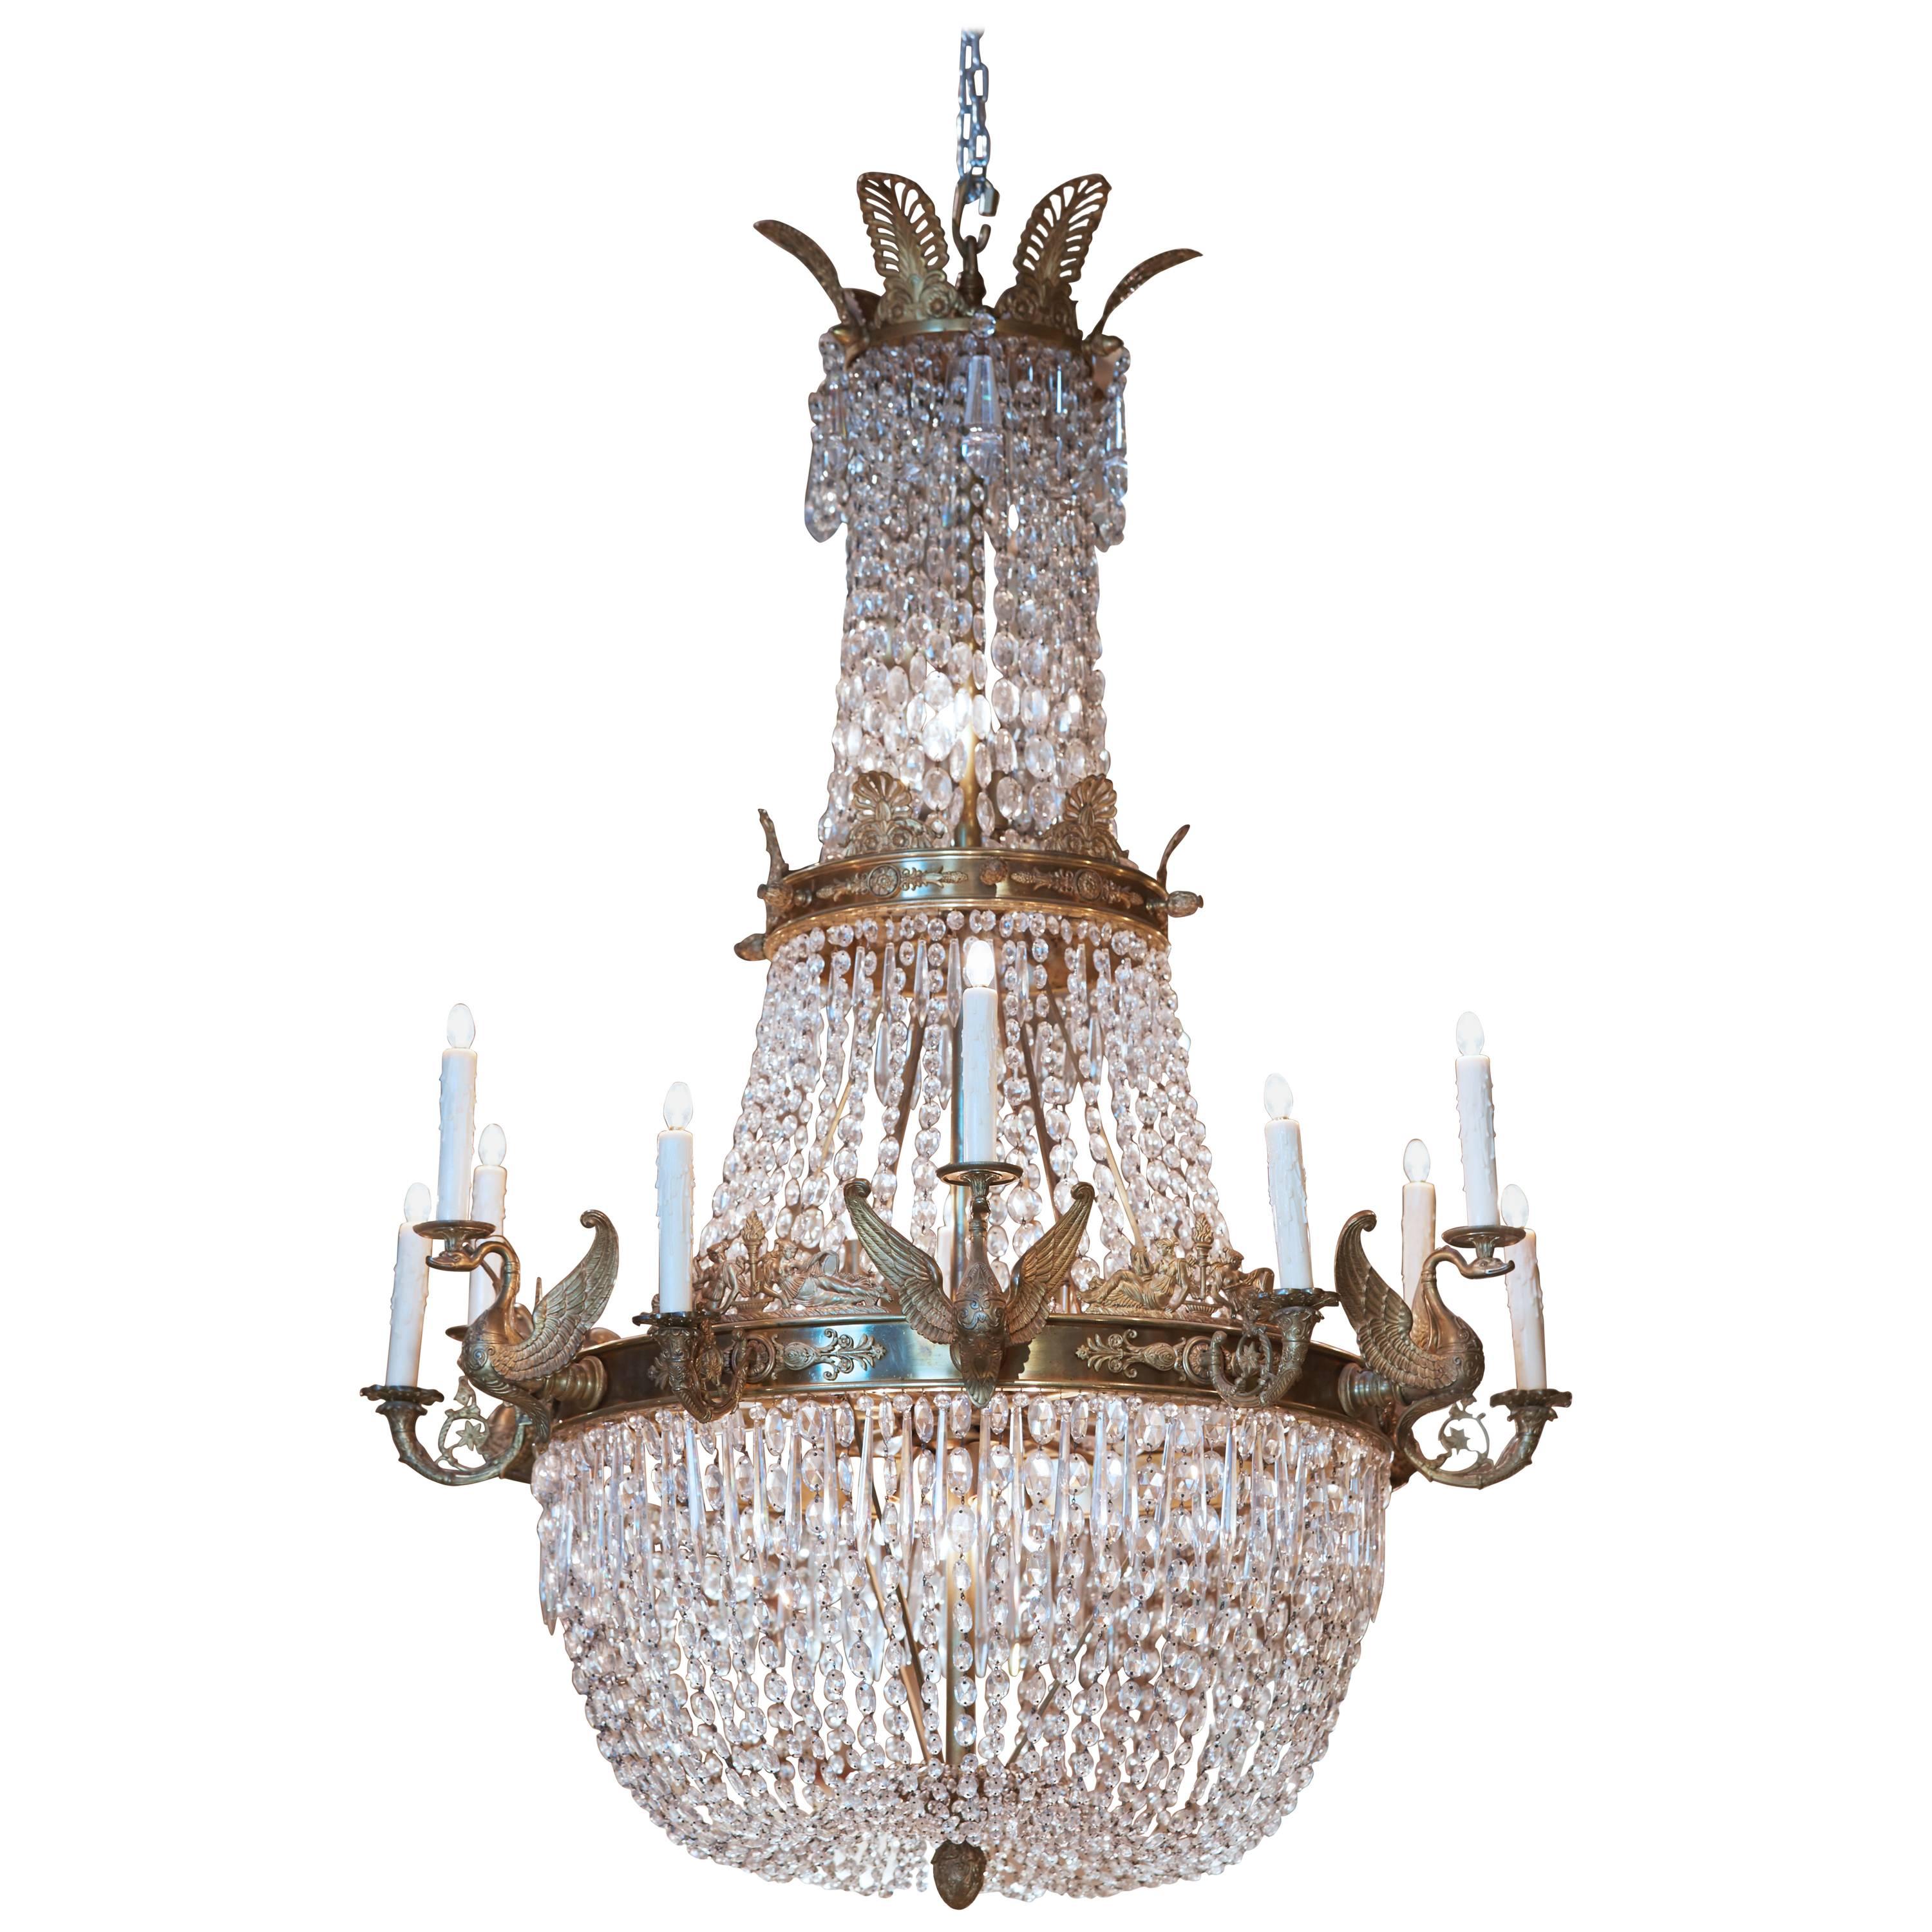 Large French Empire Style Gilt Bronze and Crystal Chandelier